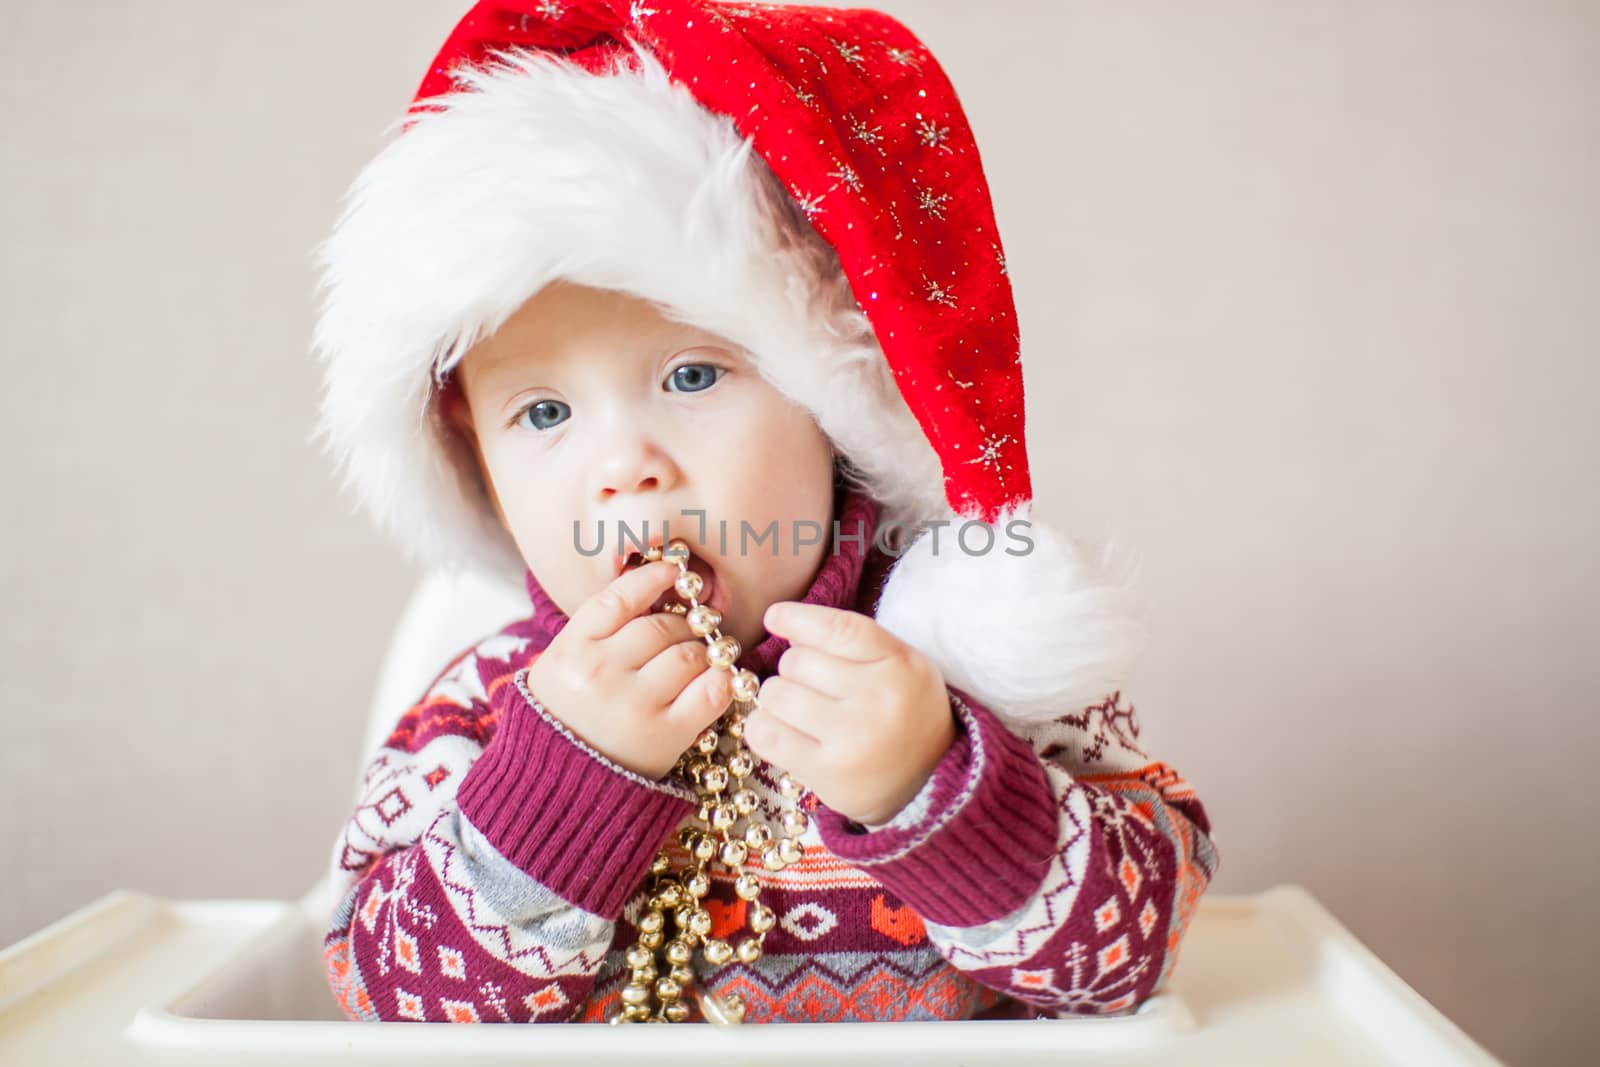 A little baby girl in a New Year's hat of Santa Claus examines and plays with New Year's decorations. by malyshkamju